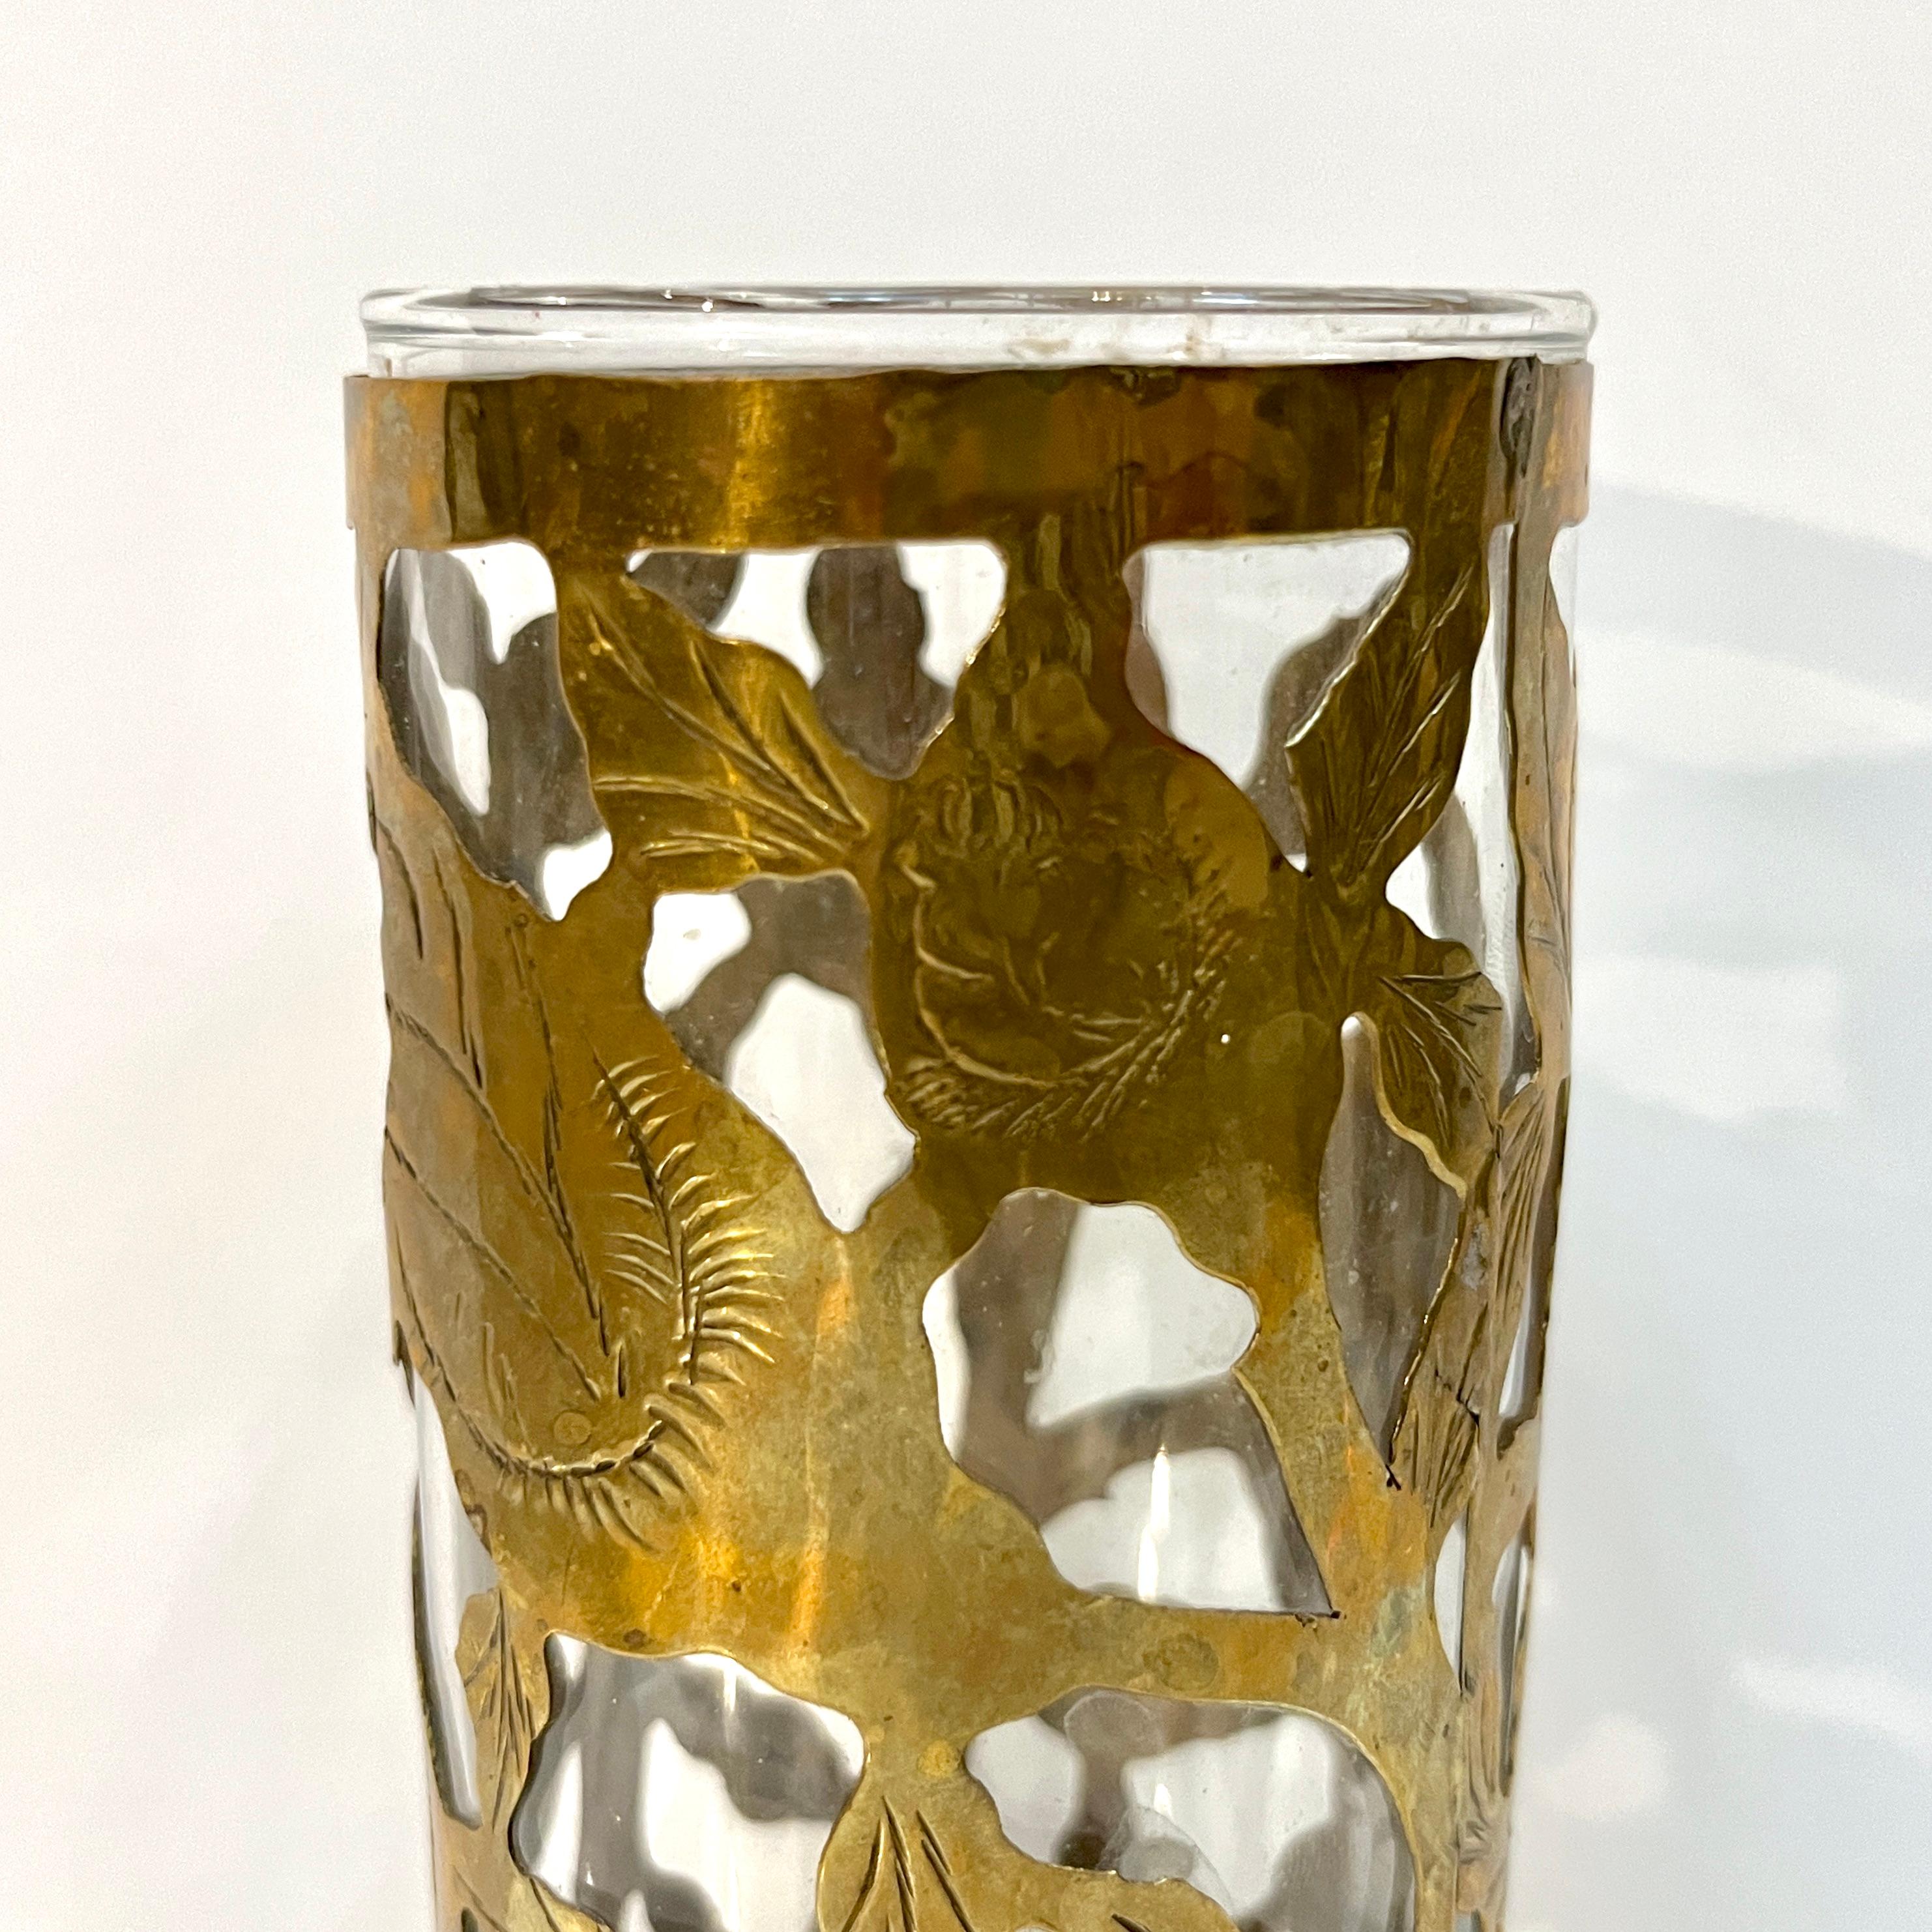 1960 Mexican Set 4 Drinking Glasses Encased in Etched Cutwork Floral Brass Decor In Good Condition For Sale In New York, NY